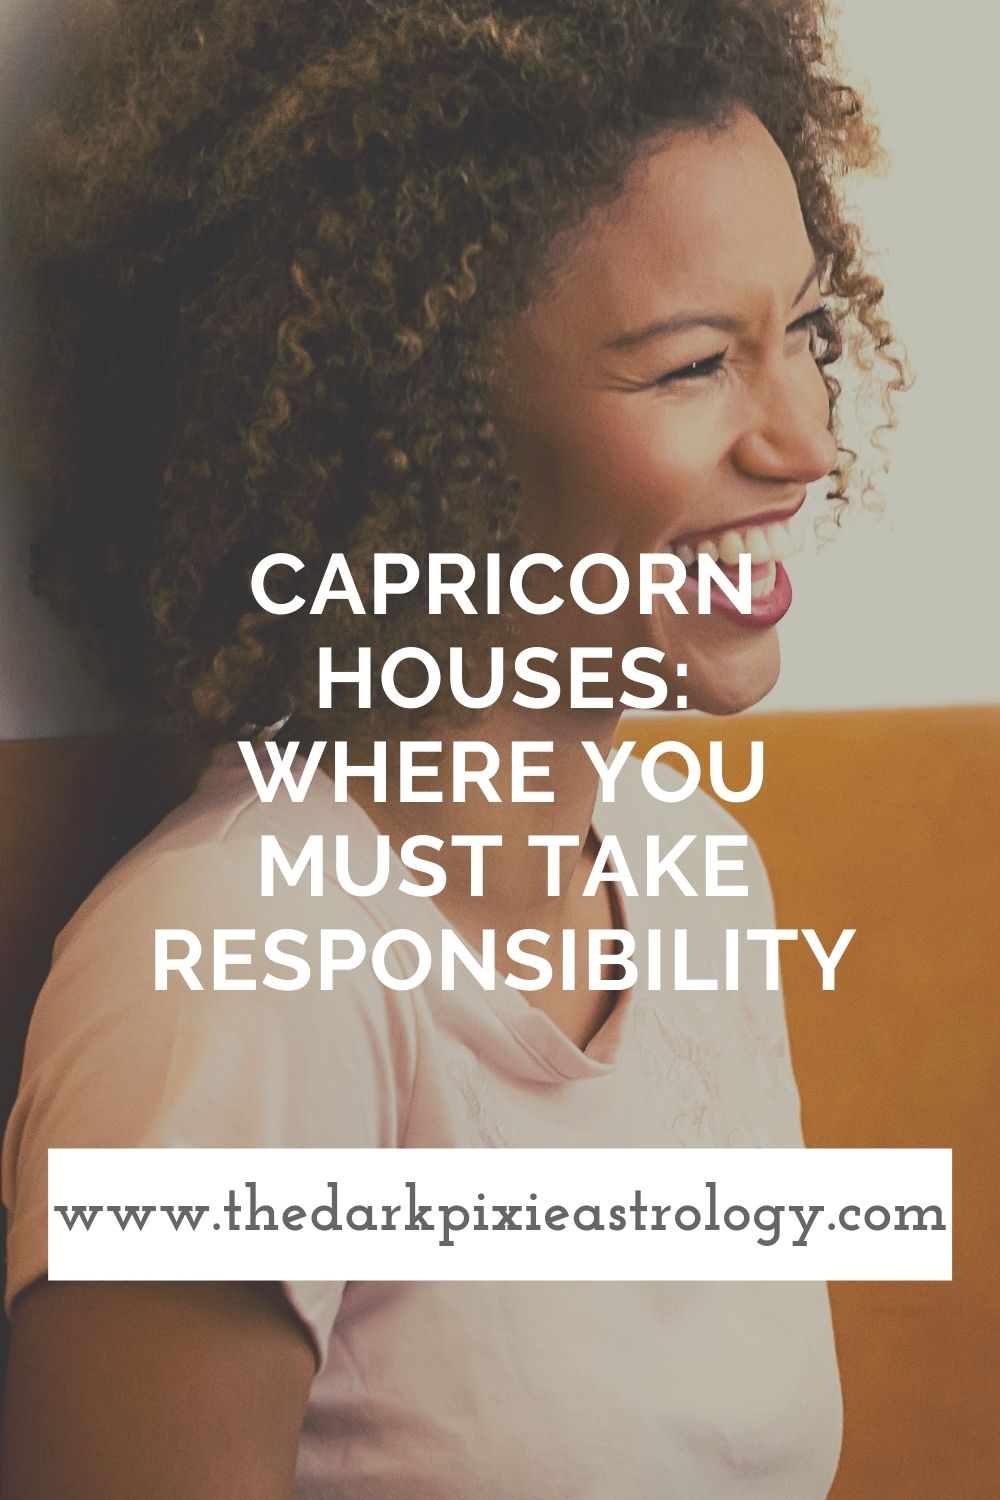 Capricorn Houses: Where You Must Take Responsibility - The Dark Pixie Astrology